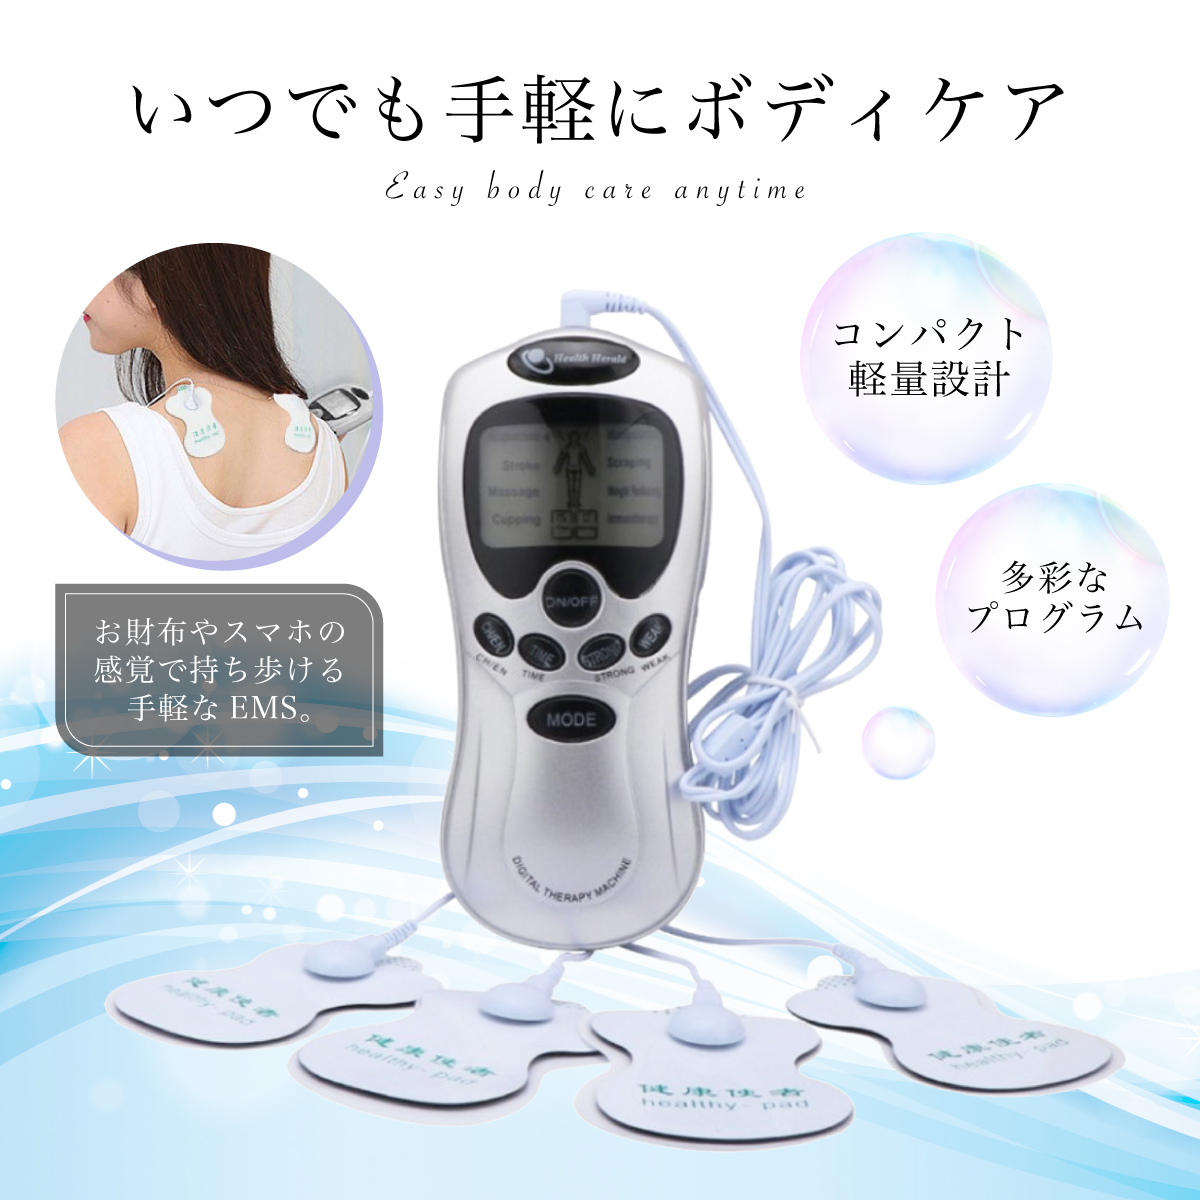  new model EMS massager compact massager ( non medical care equipment ) body 1+ pad 16 sheets relation : Pal teal low cycle therapeutics device poke slim 